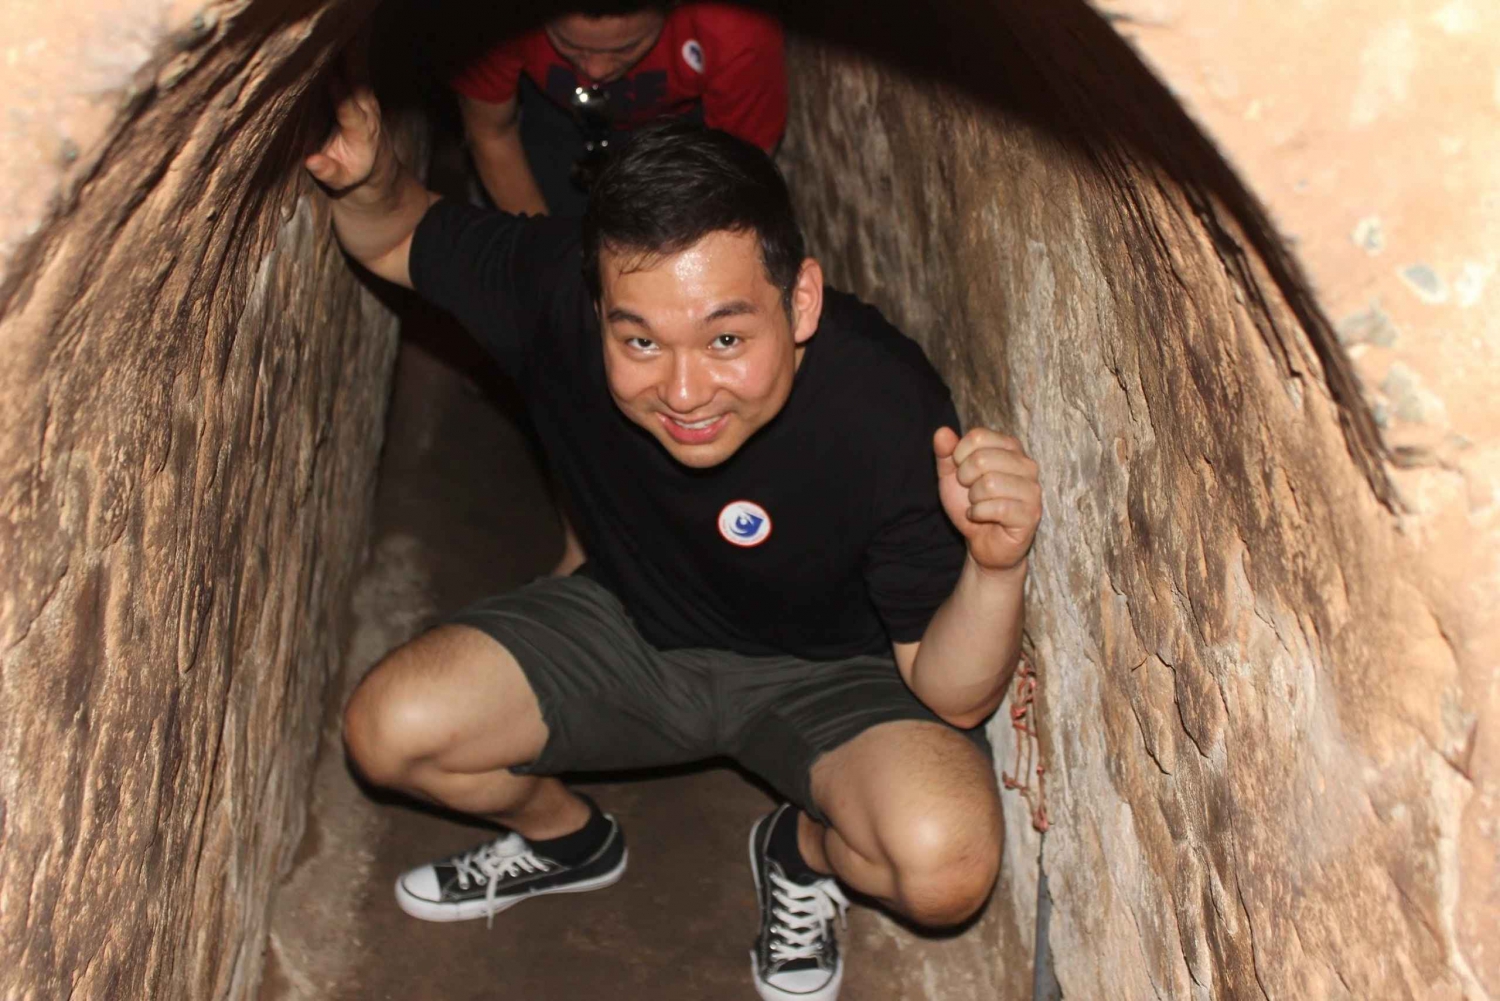 Ho Chi Minh: Ganztagestour Cu Chi Tunnel & Mekong Delta